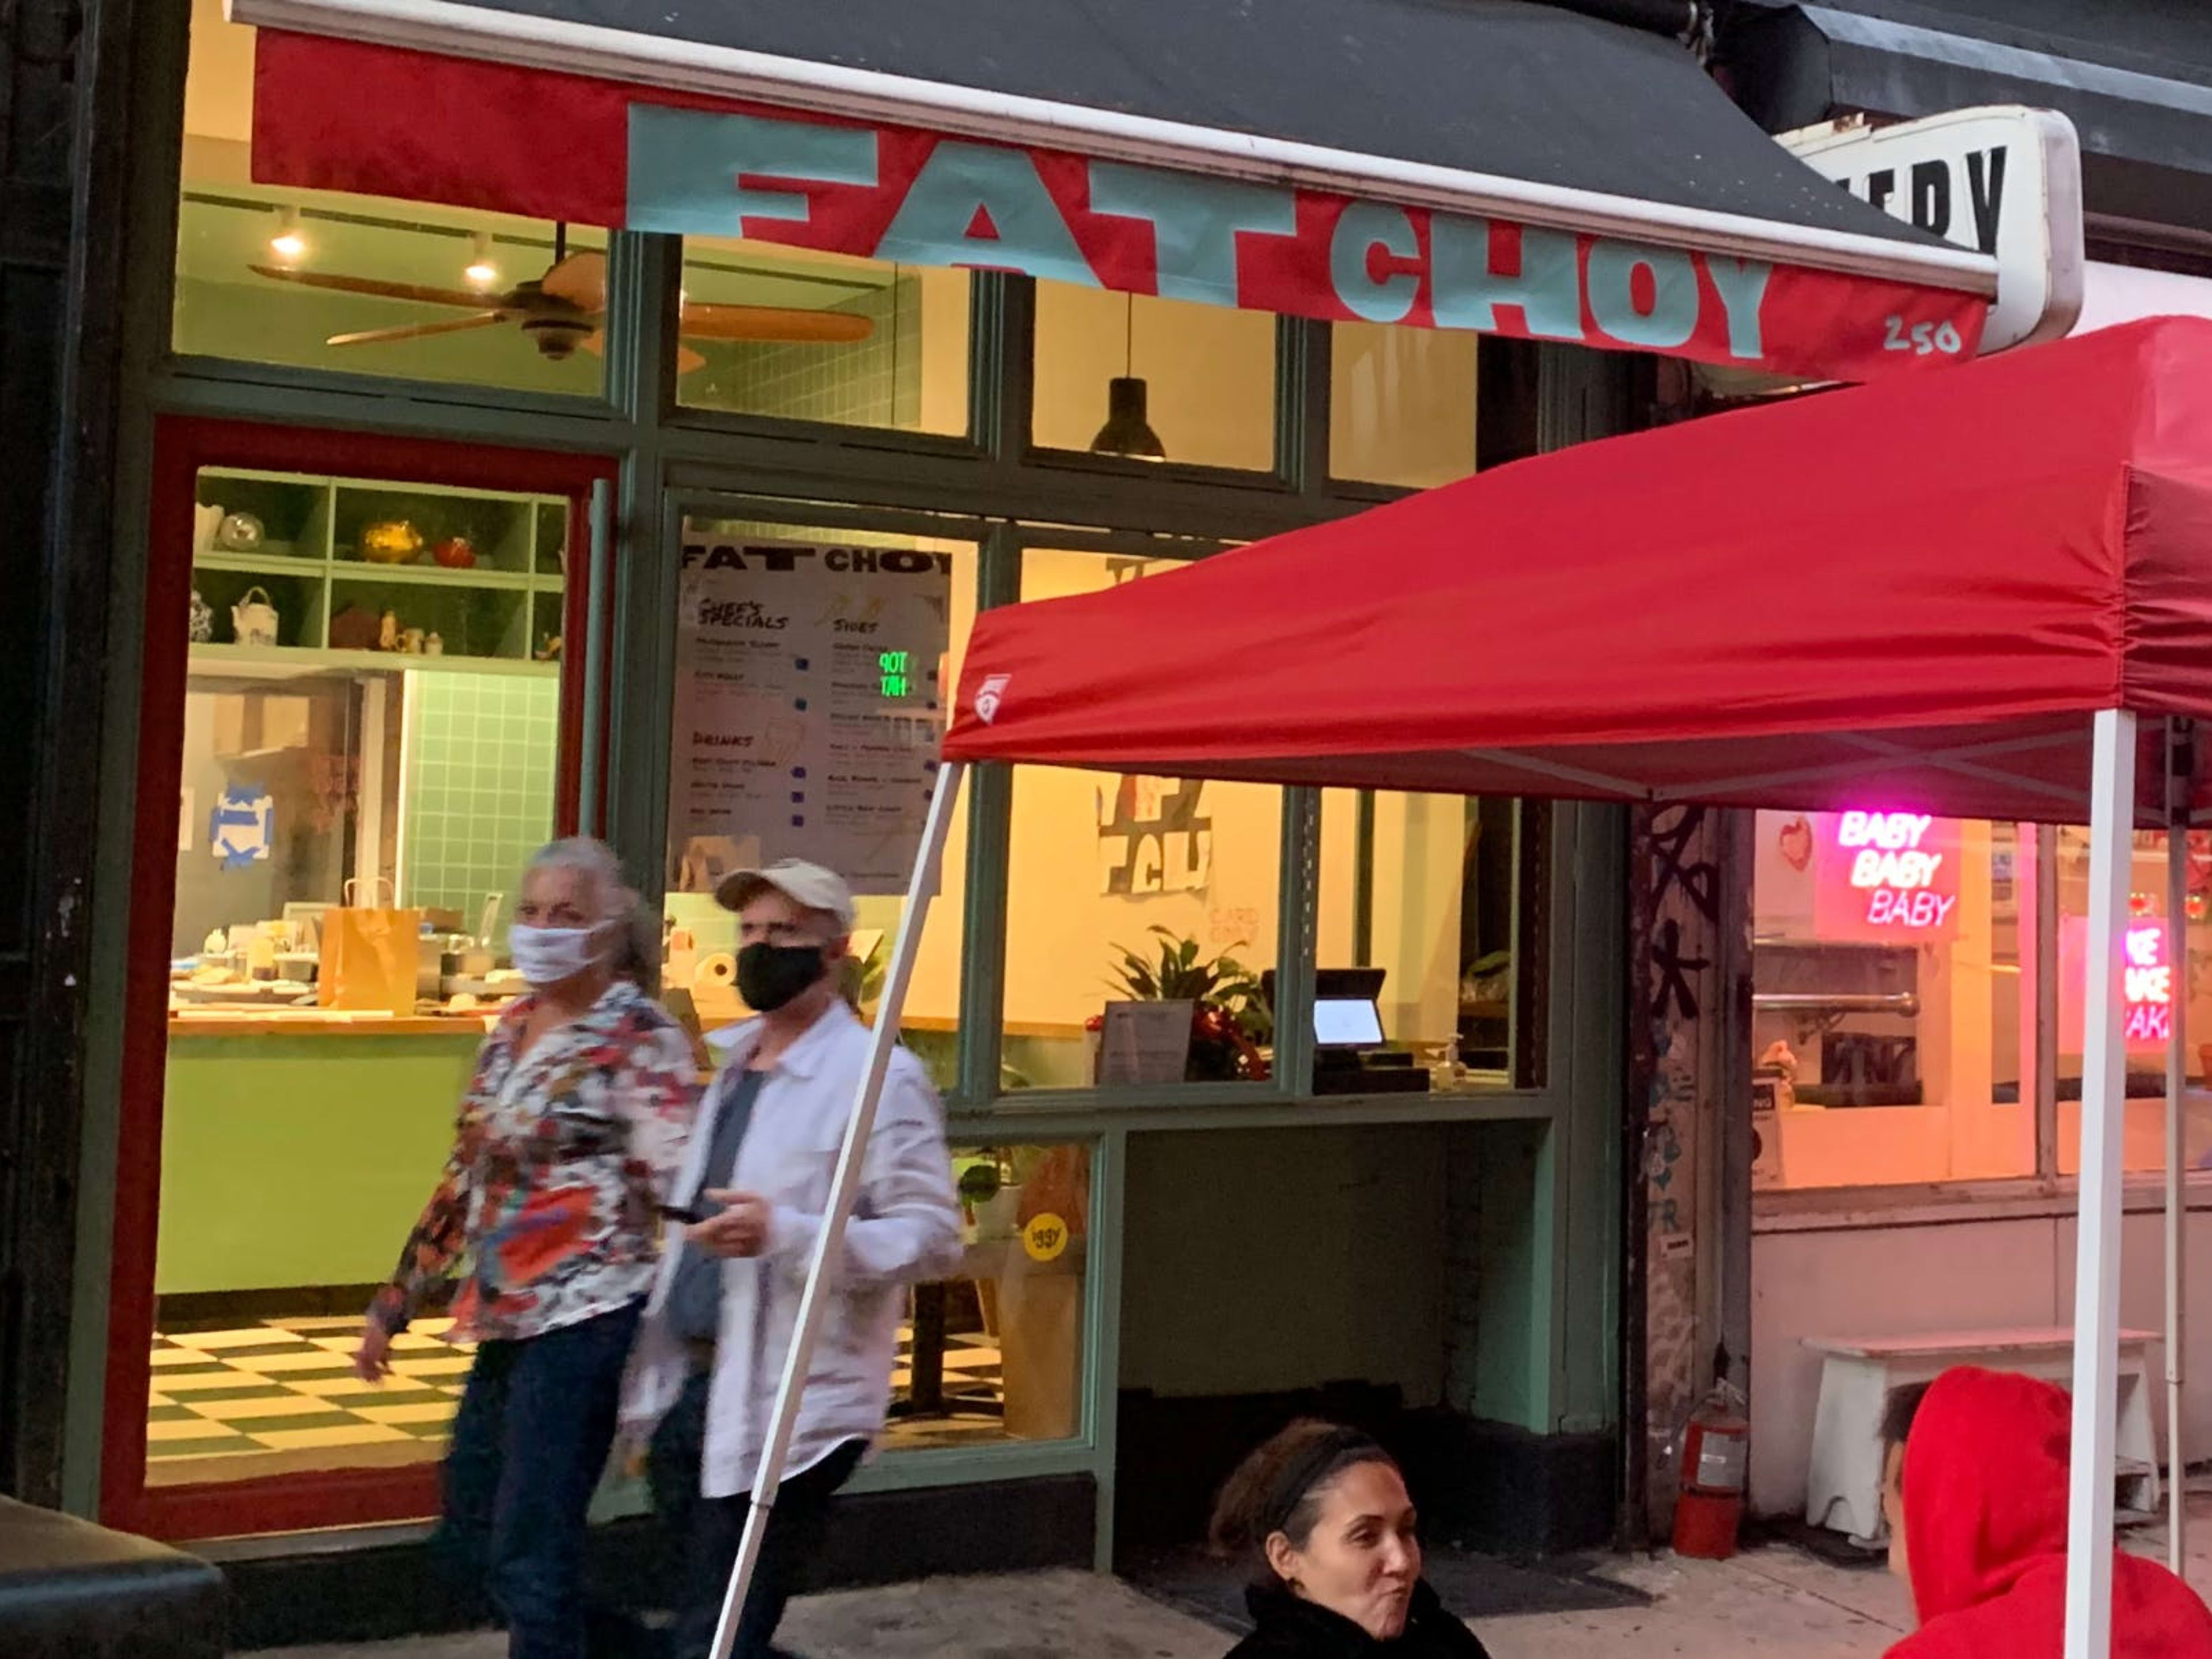 27 Restaurants With Takeout Windows & Seat-Yourself Tables guide image